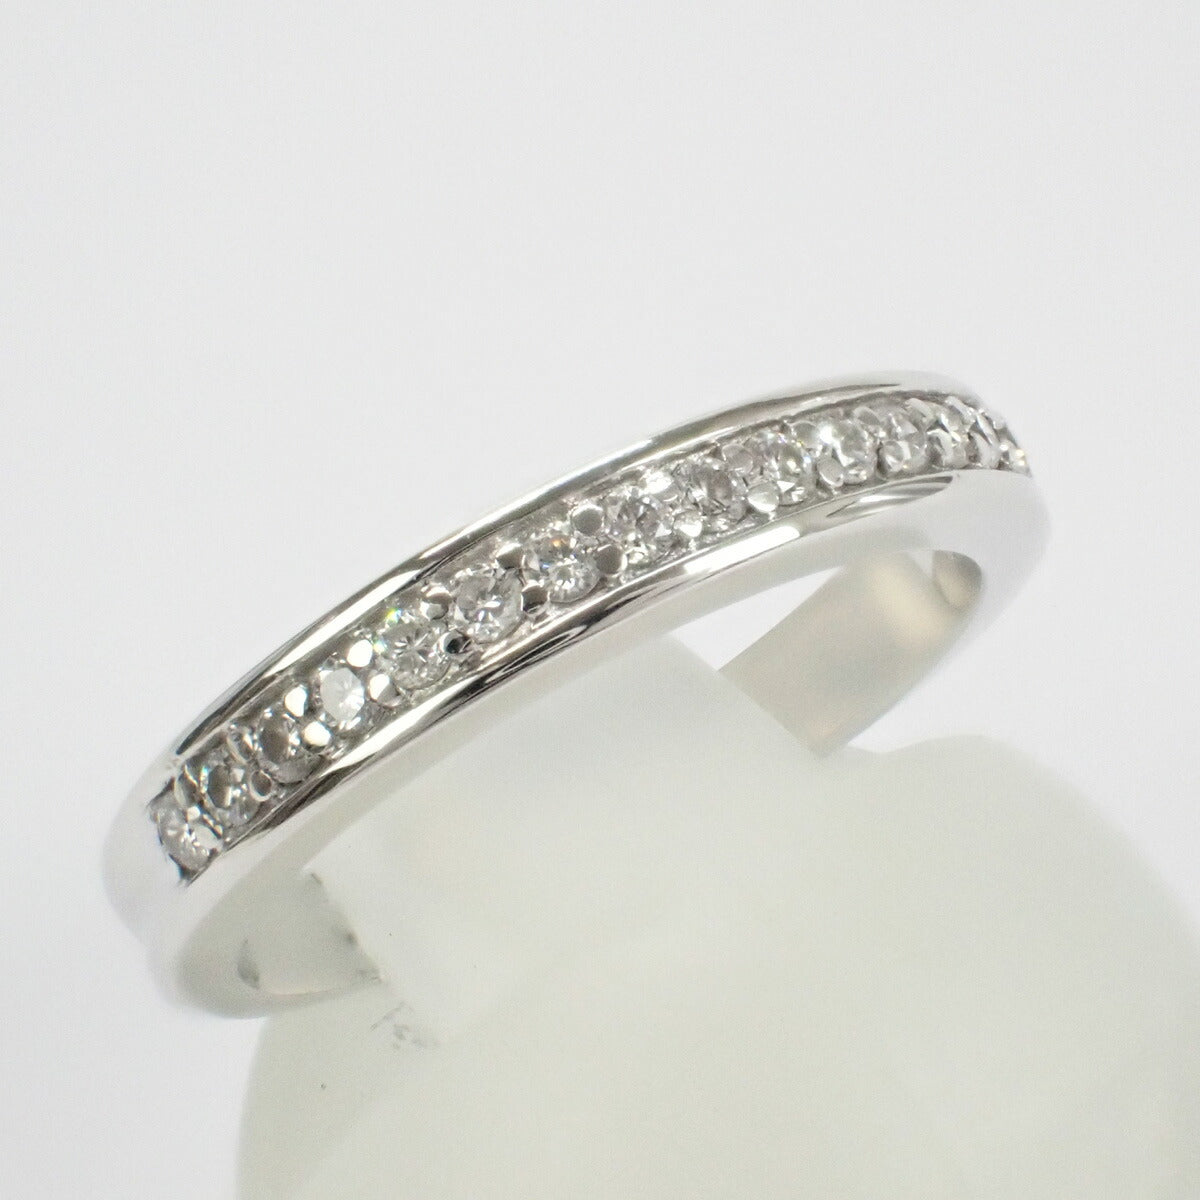 [LuxUness]  Half Eternity Diamond Design Ring Set in K18 White Gold, Women's Size 8 in Silver  in Excellent condition